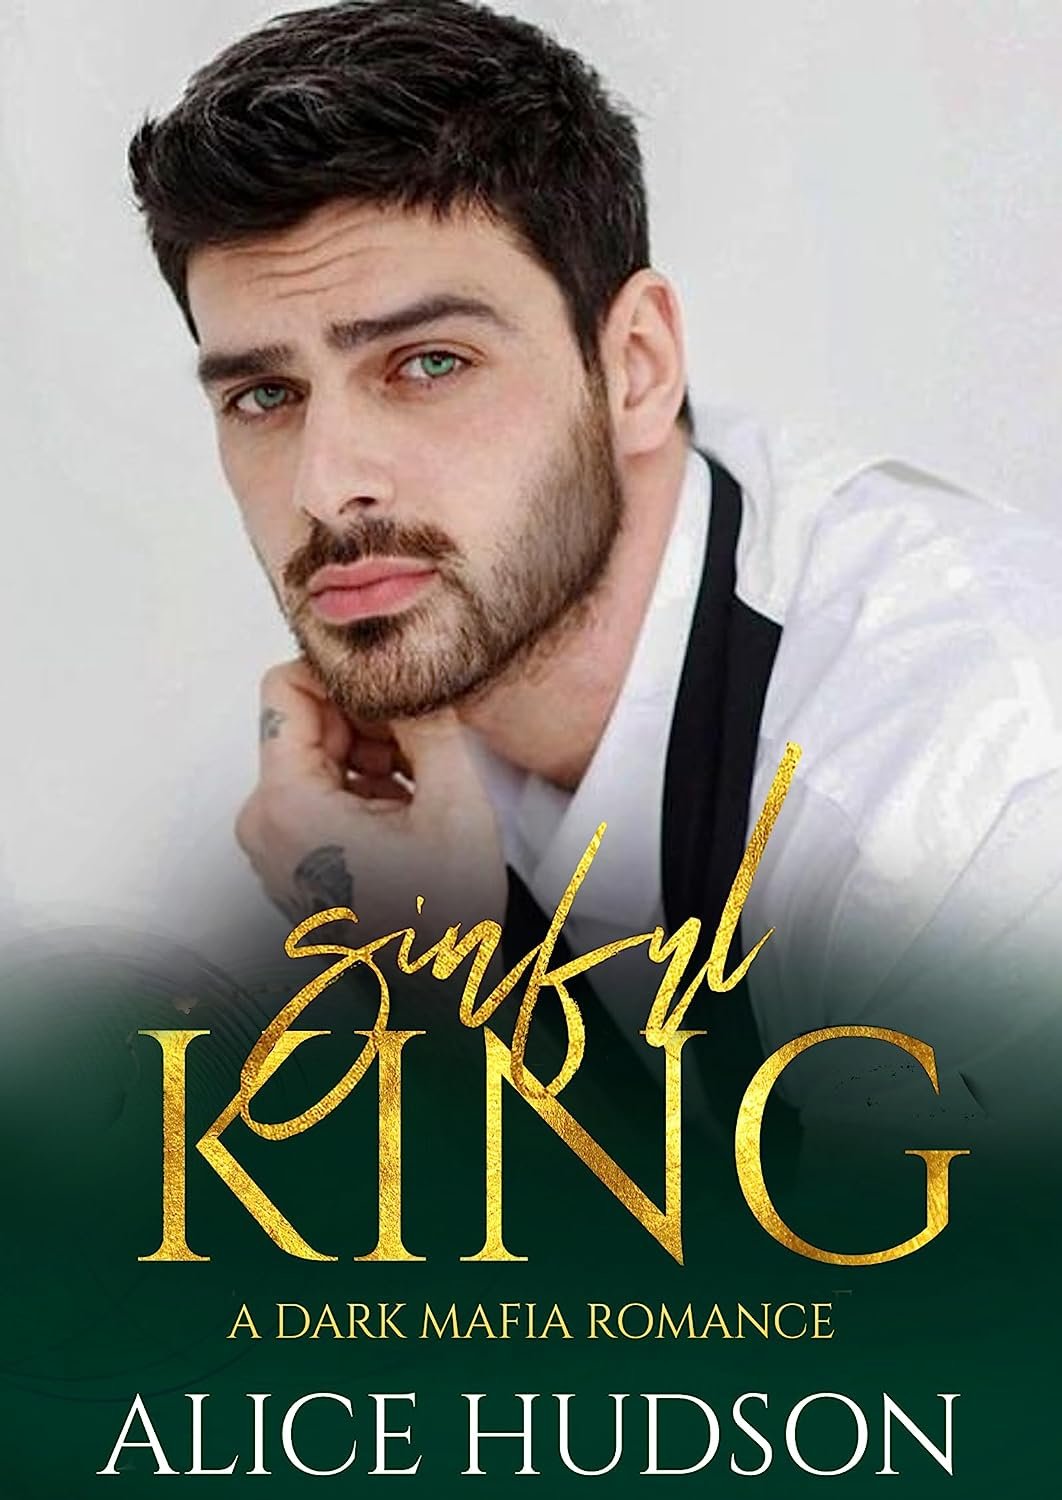 Alice F. Hudson - Sinful King : Une Romance Mafieuse Sombre